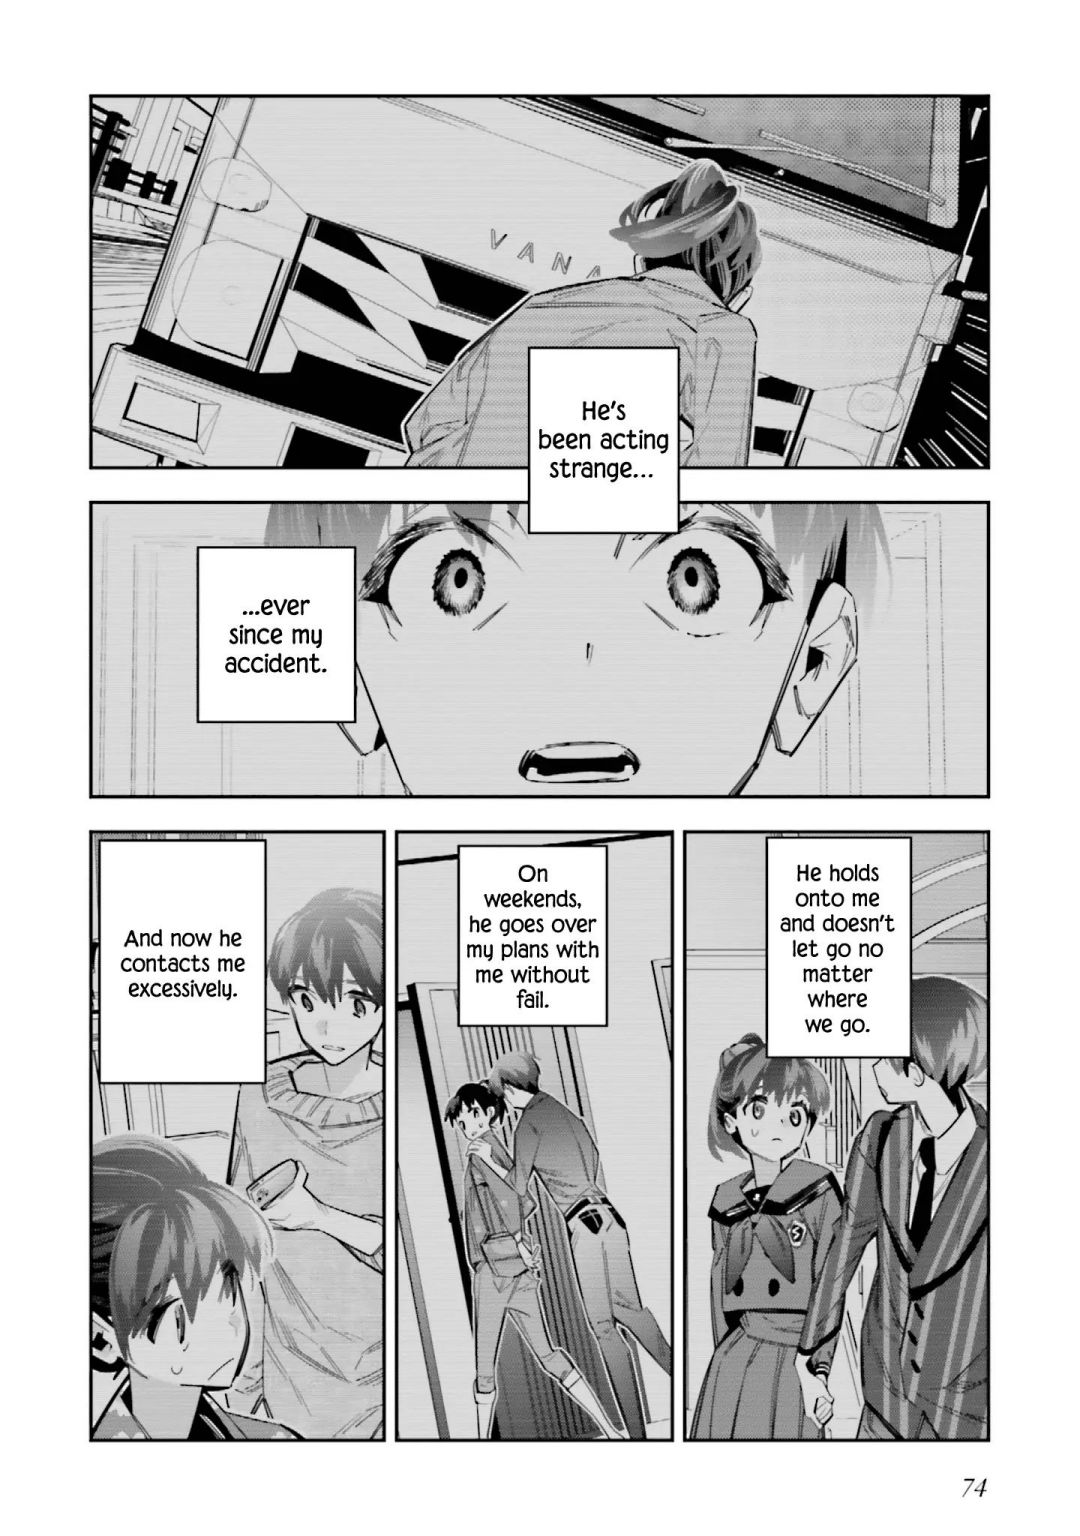 I Reincarnated As The Little Sister Of A Death Game Manga’S Murd3R Mastermind And Failed - chapter 7 - #4